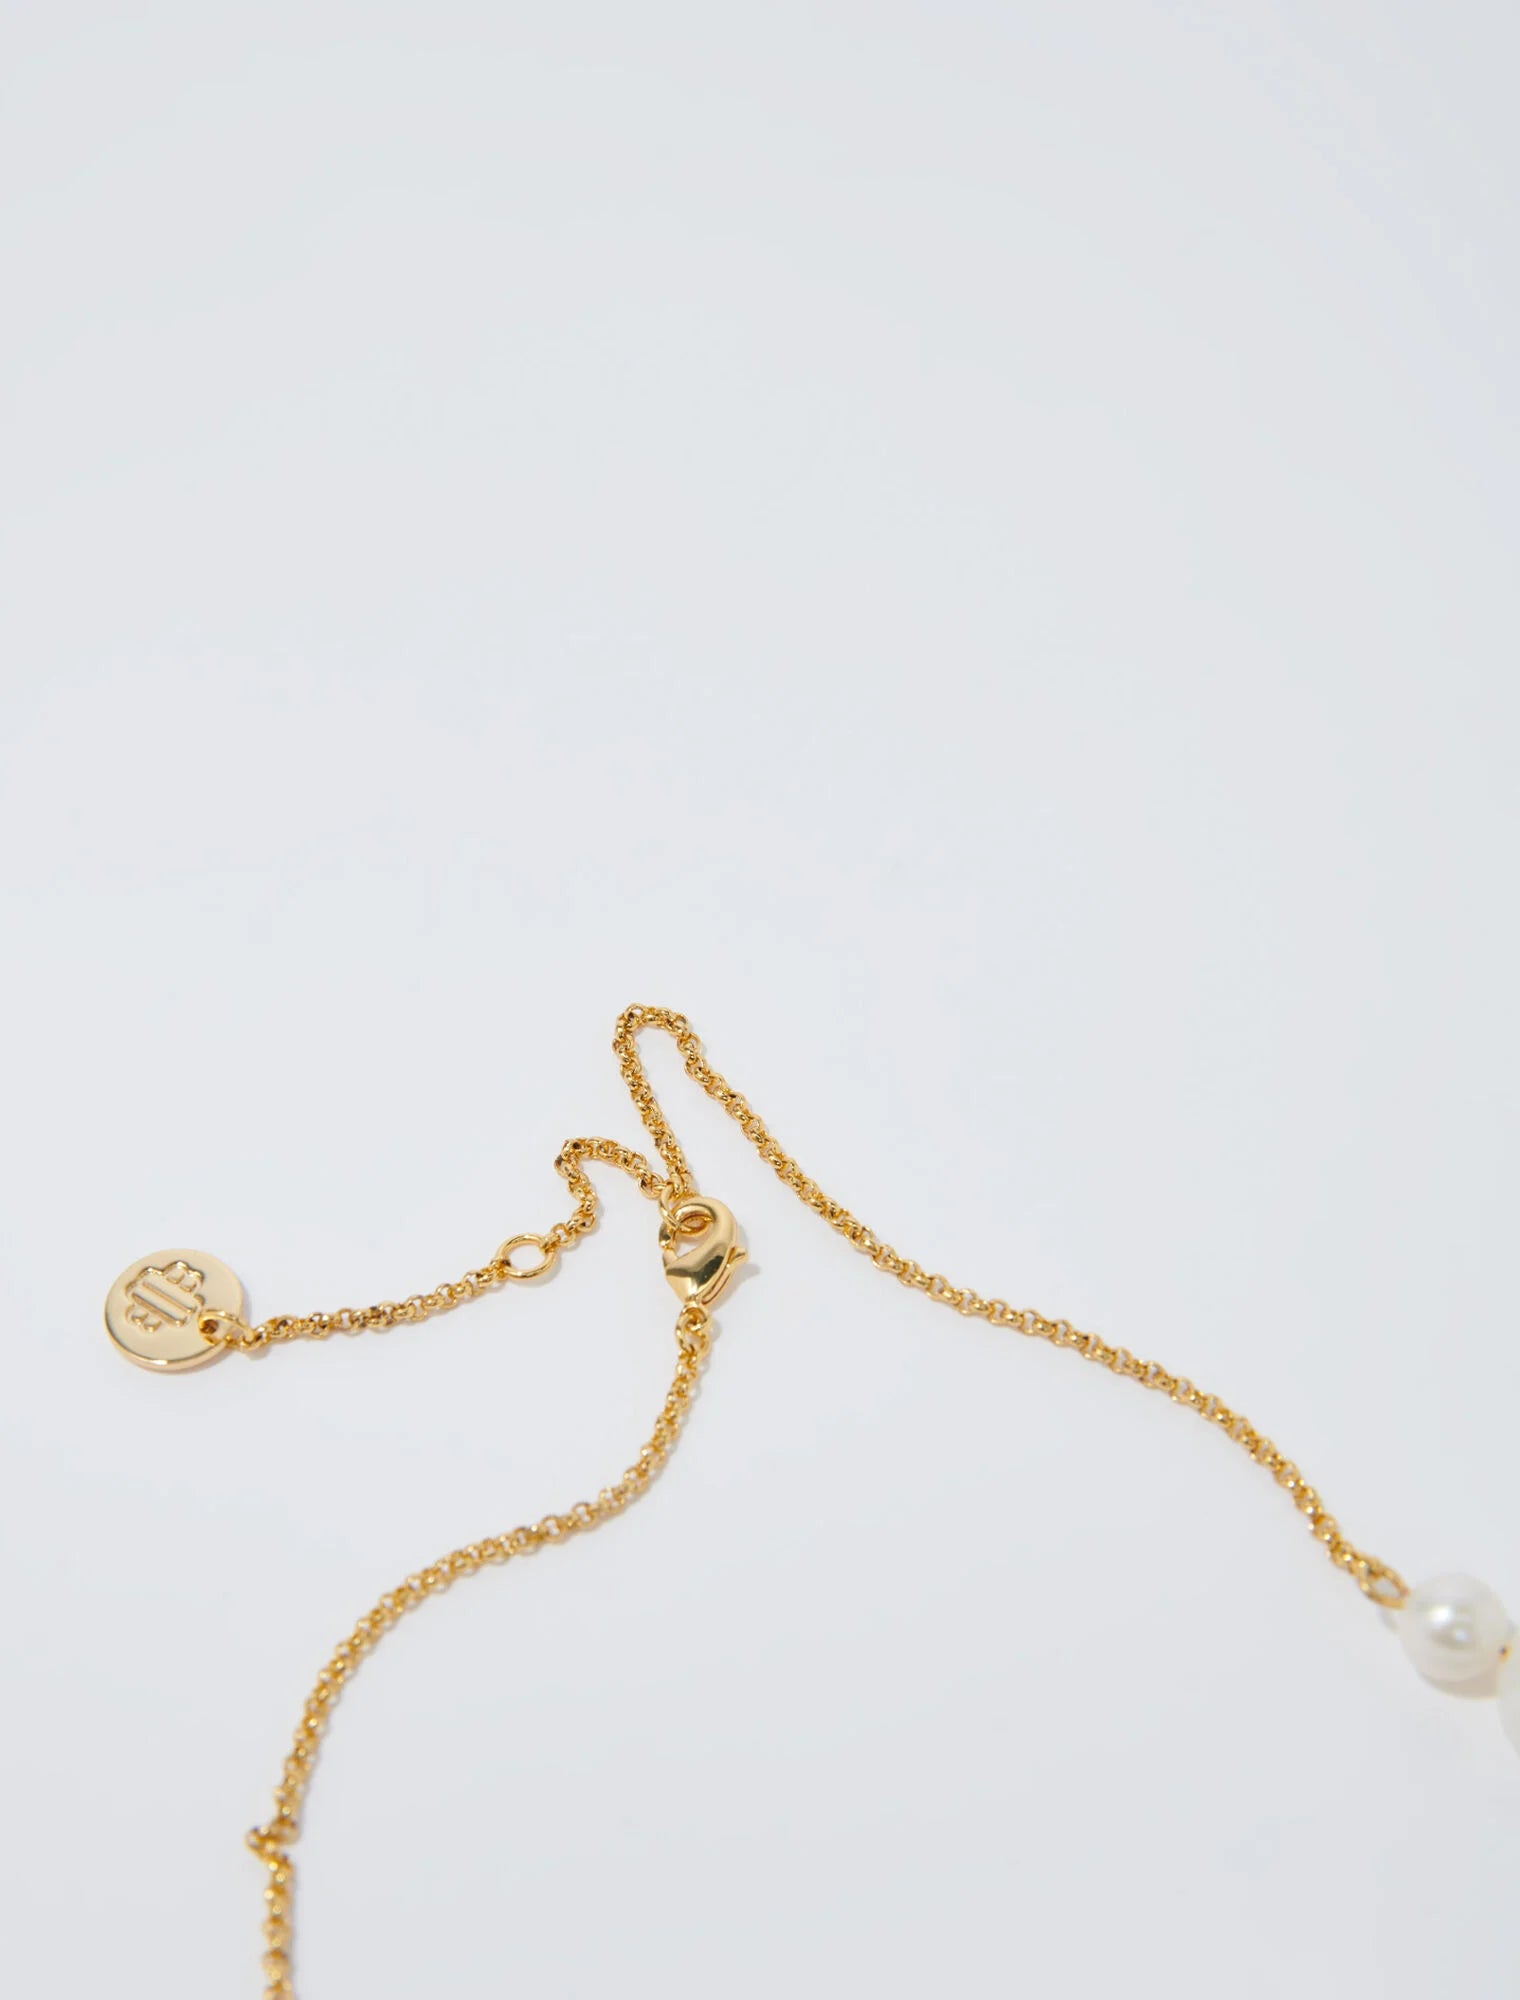 Gold-Gold chain and bead necklace